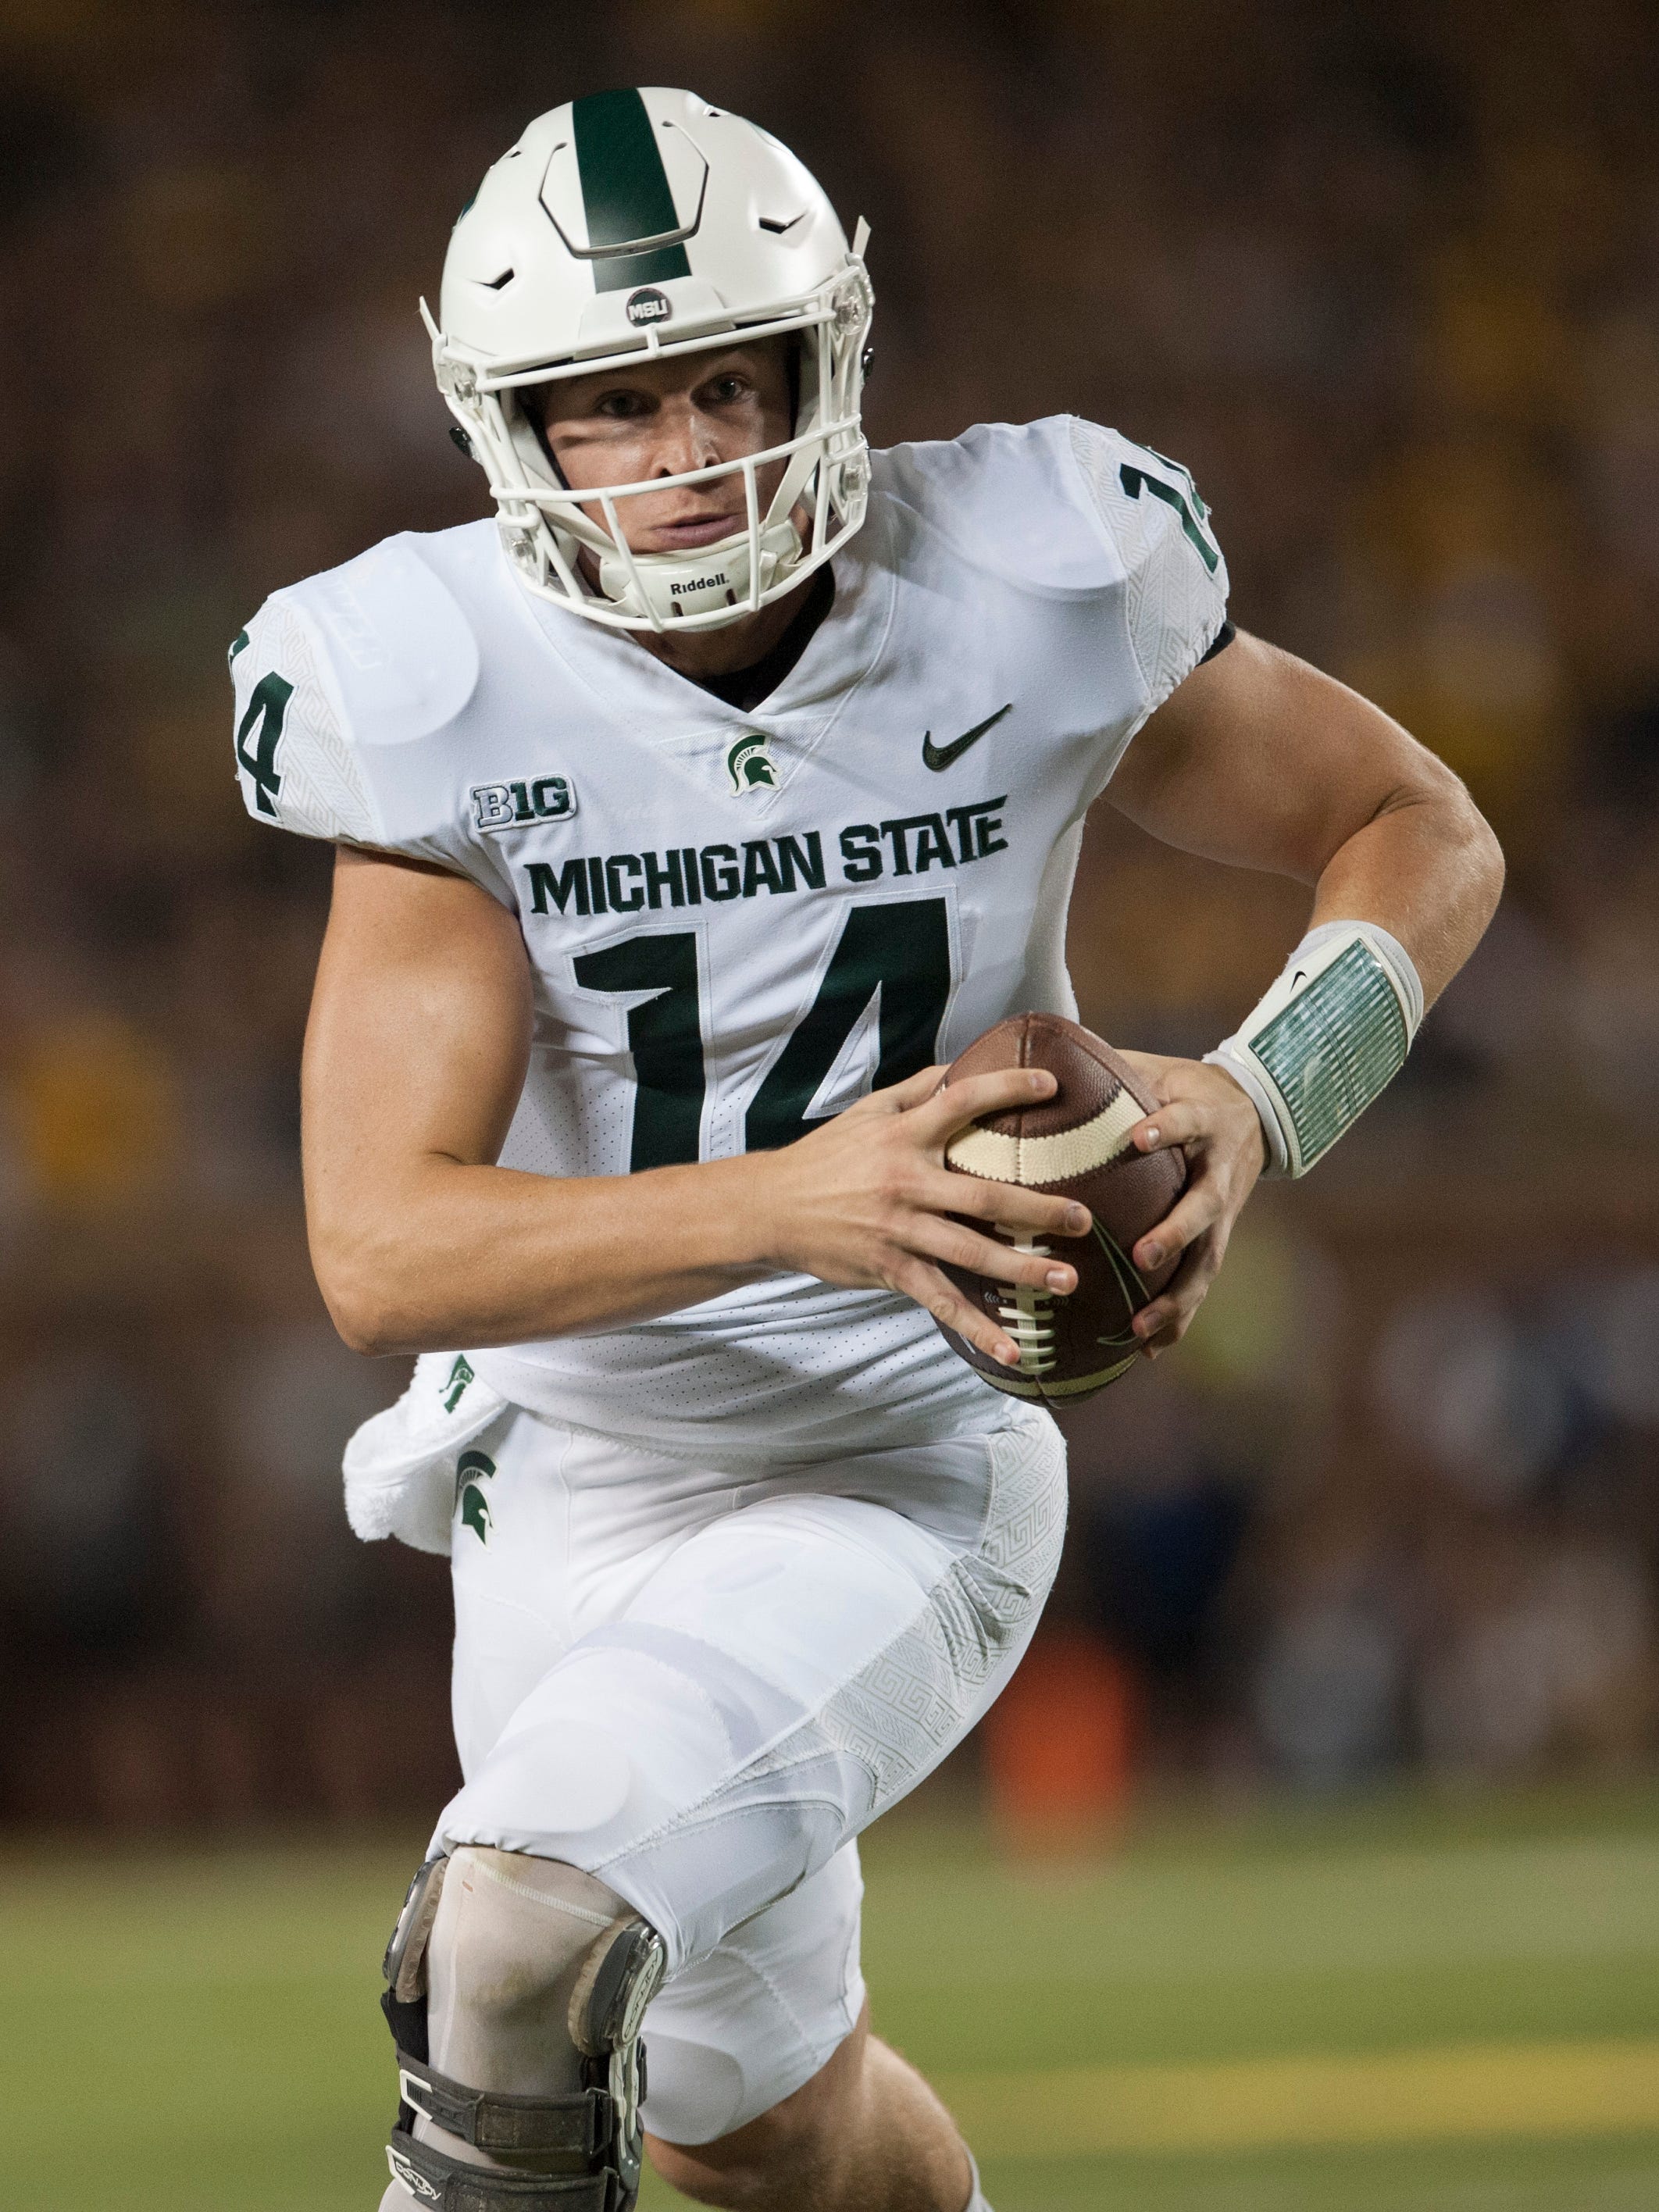 OFFENSE
Quarterback – Brian Lewerke, Jr. This one is a no-brainer as Lewerke is coming off a breakout season in 2017 when he compiled 3,352 total yards, the second-most in program history, while starting all 13 games. Expect him to take another jump this season, as he's already spent plenty of time on his accuracy, something that showed in his limited work in the spring game. Redshirt freshman Rocky Lombardi should be the backup and should get some work early in the season. Also in the backup mix is graduate transfer Mickey Macius and freshman Theo Day, who likely will redshirt.